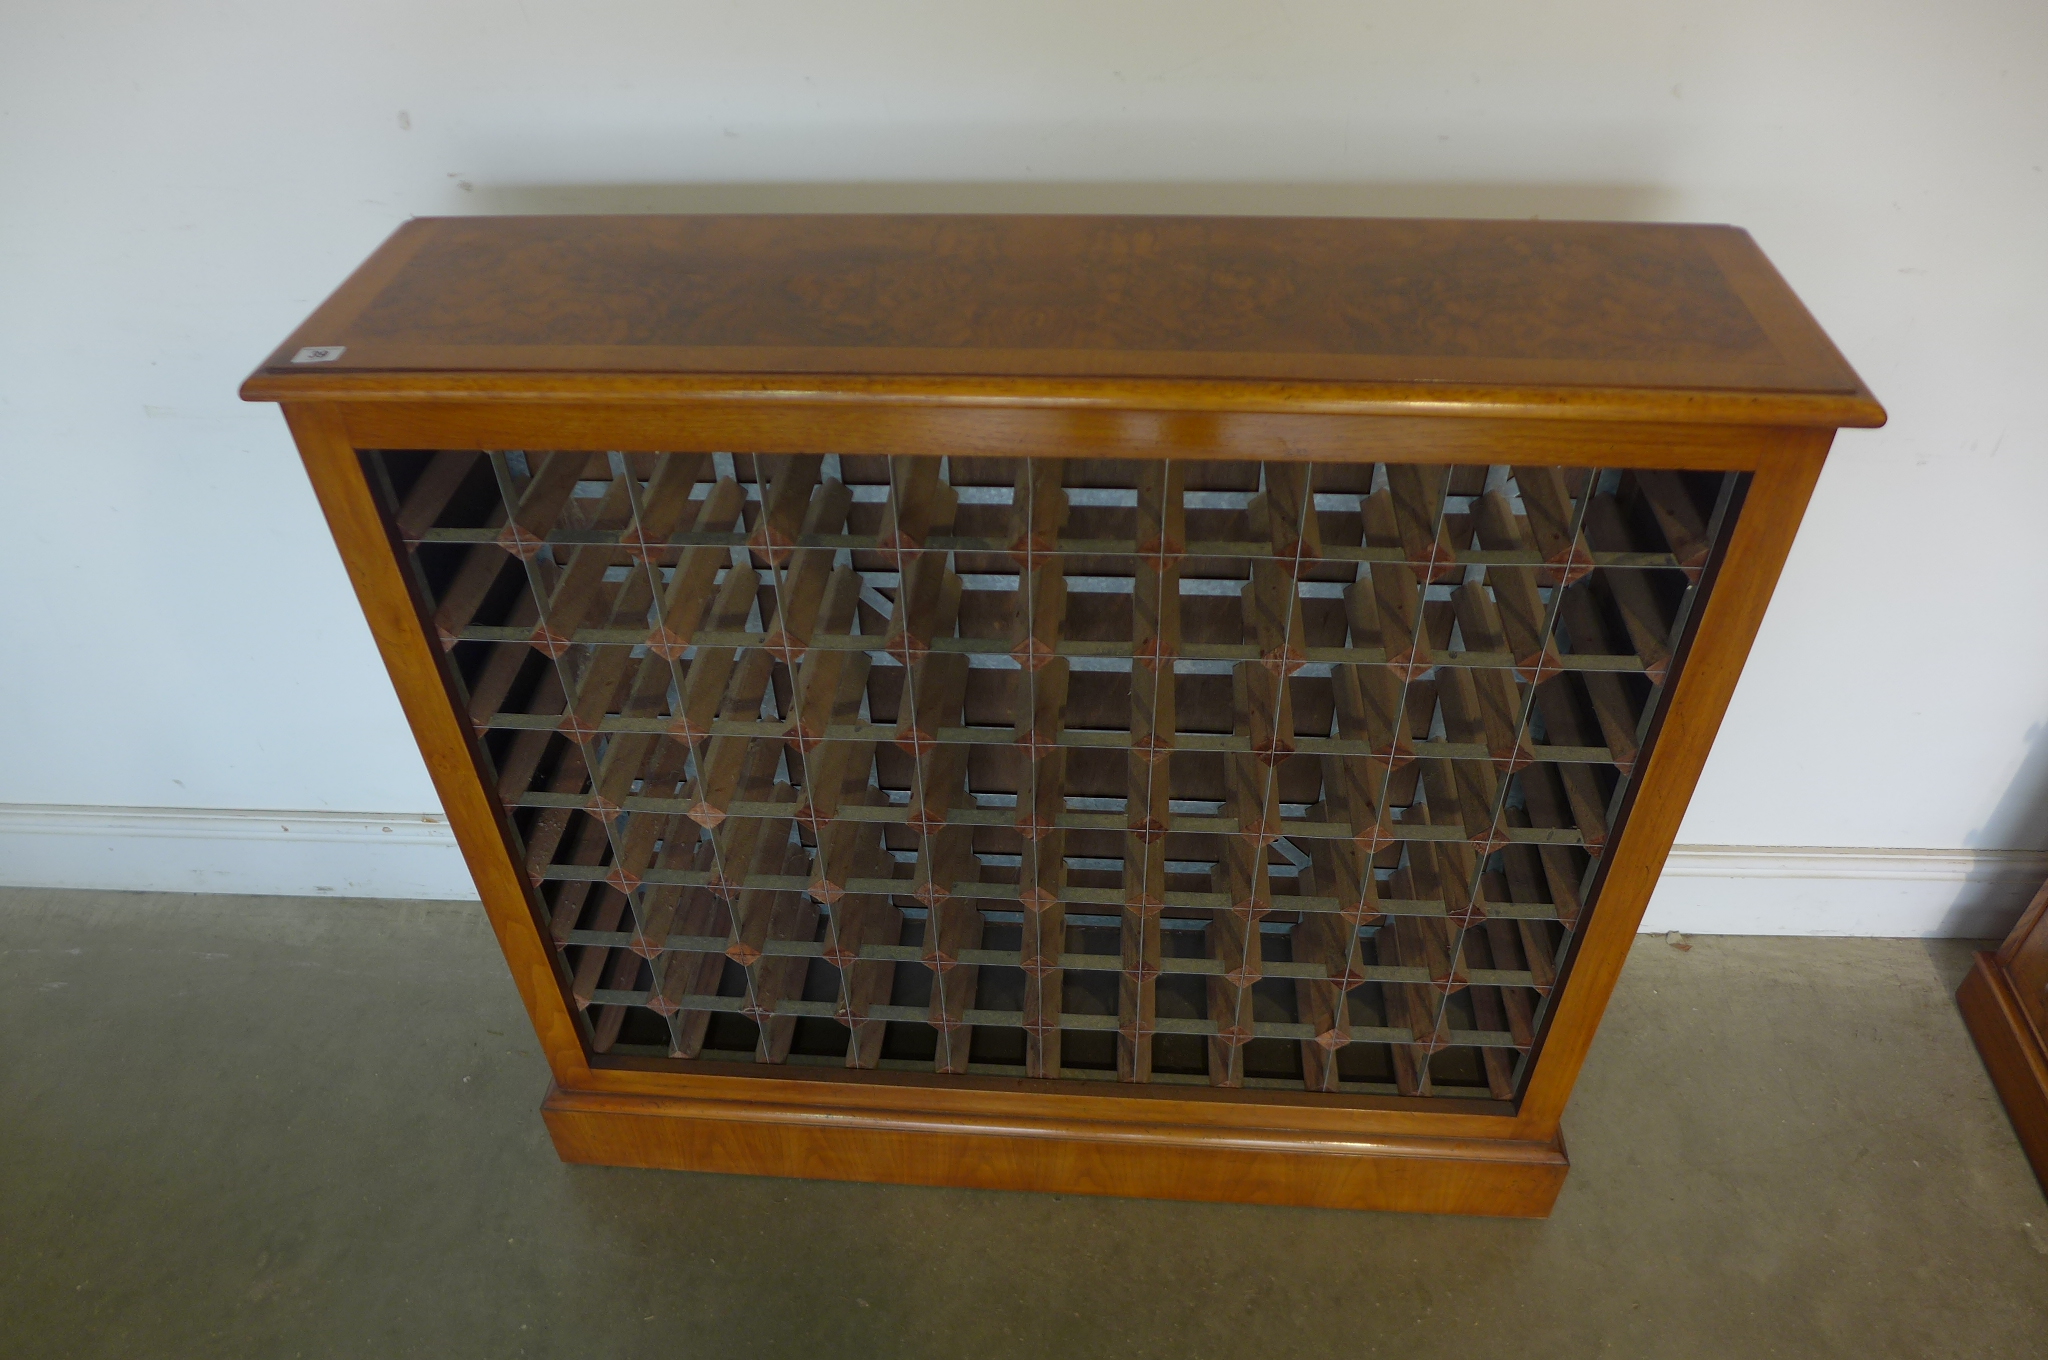 A walnut 80 bottle wine rack - made by a local craftsman to a high standard - 100cm x 108cm x 29cm - Image 2 of 2